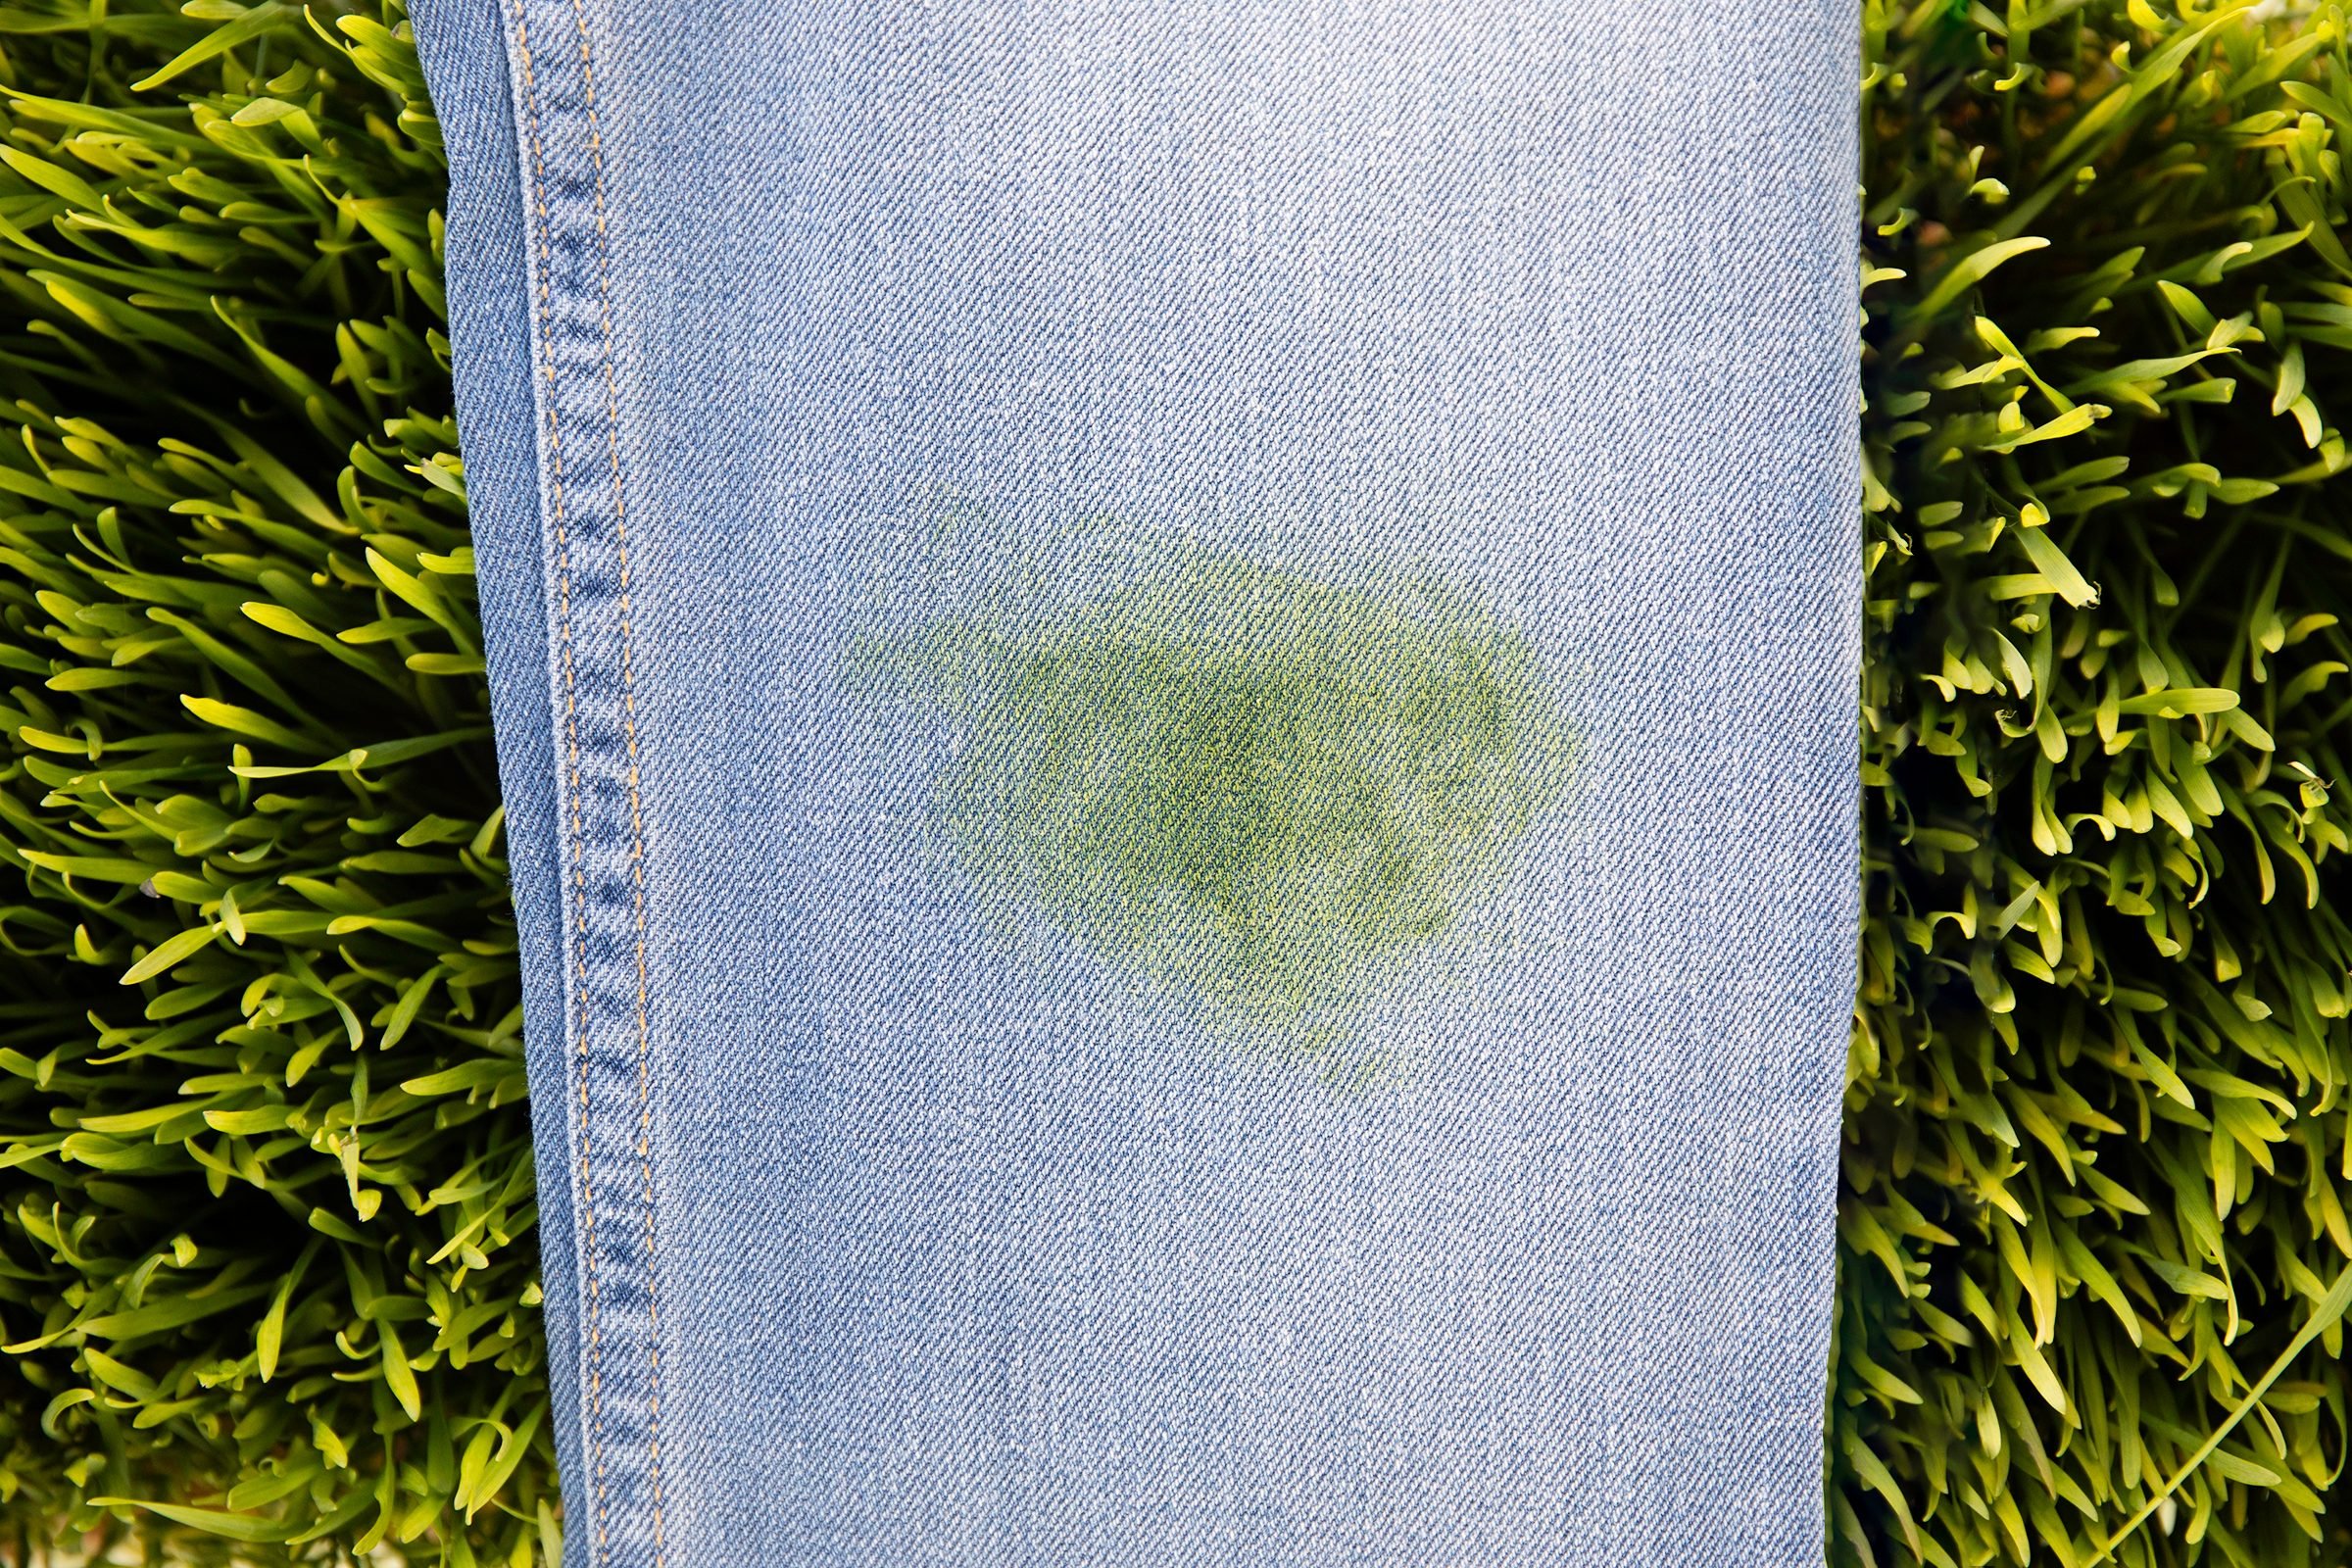 how to get grass stains out of clothes